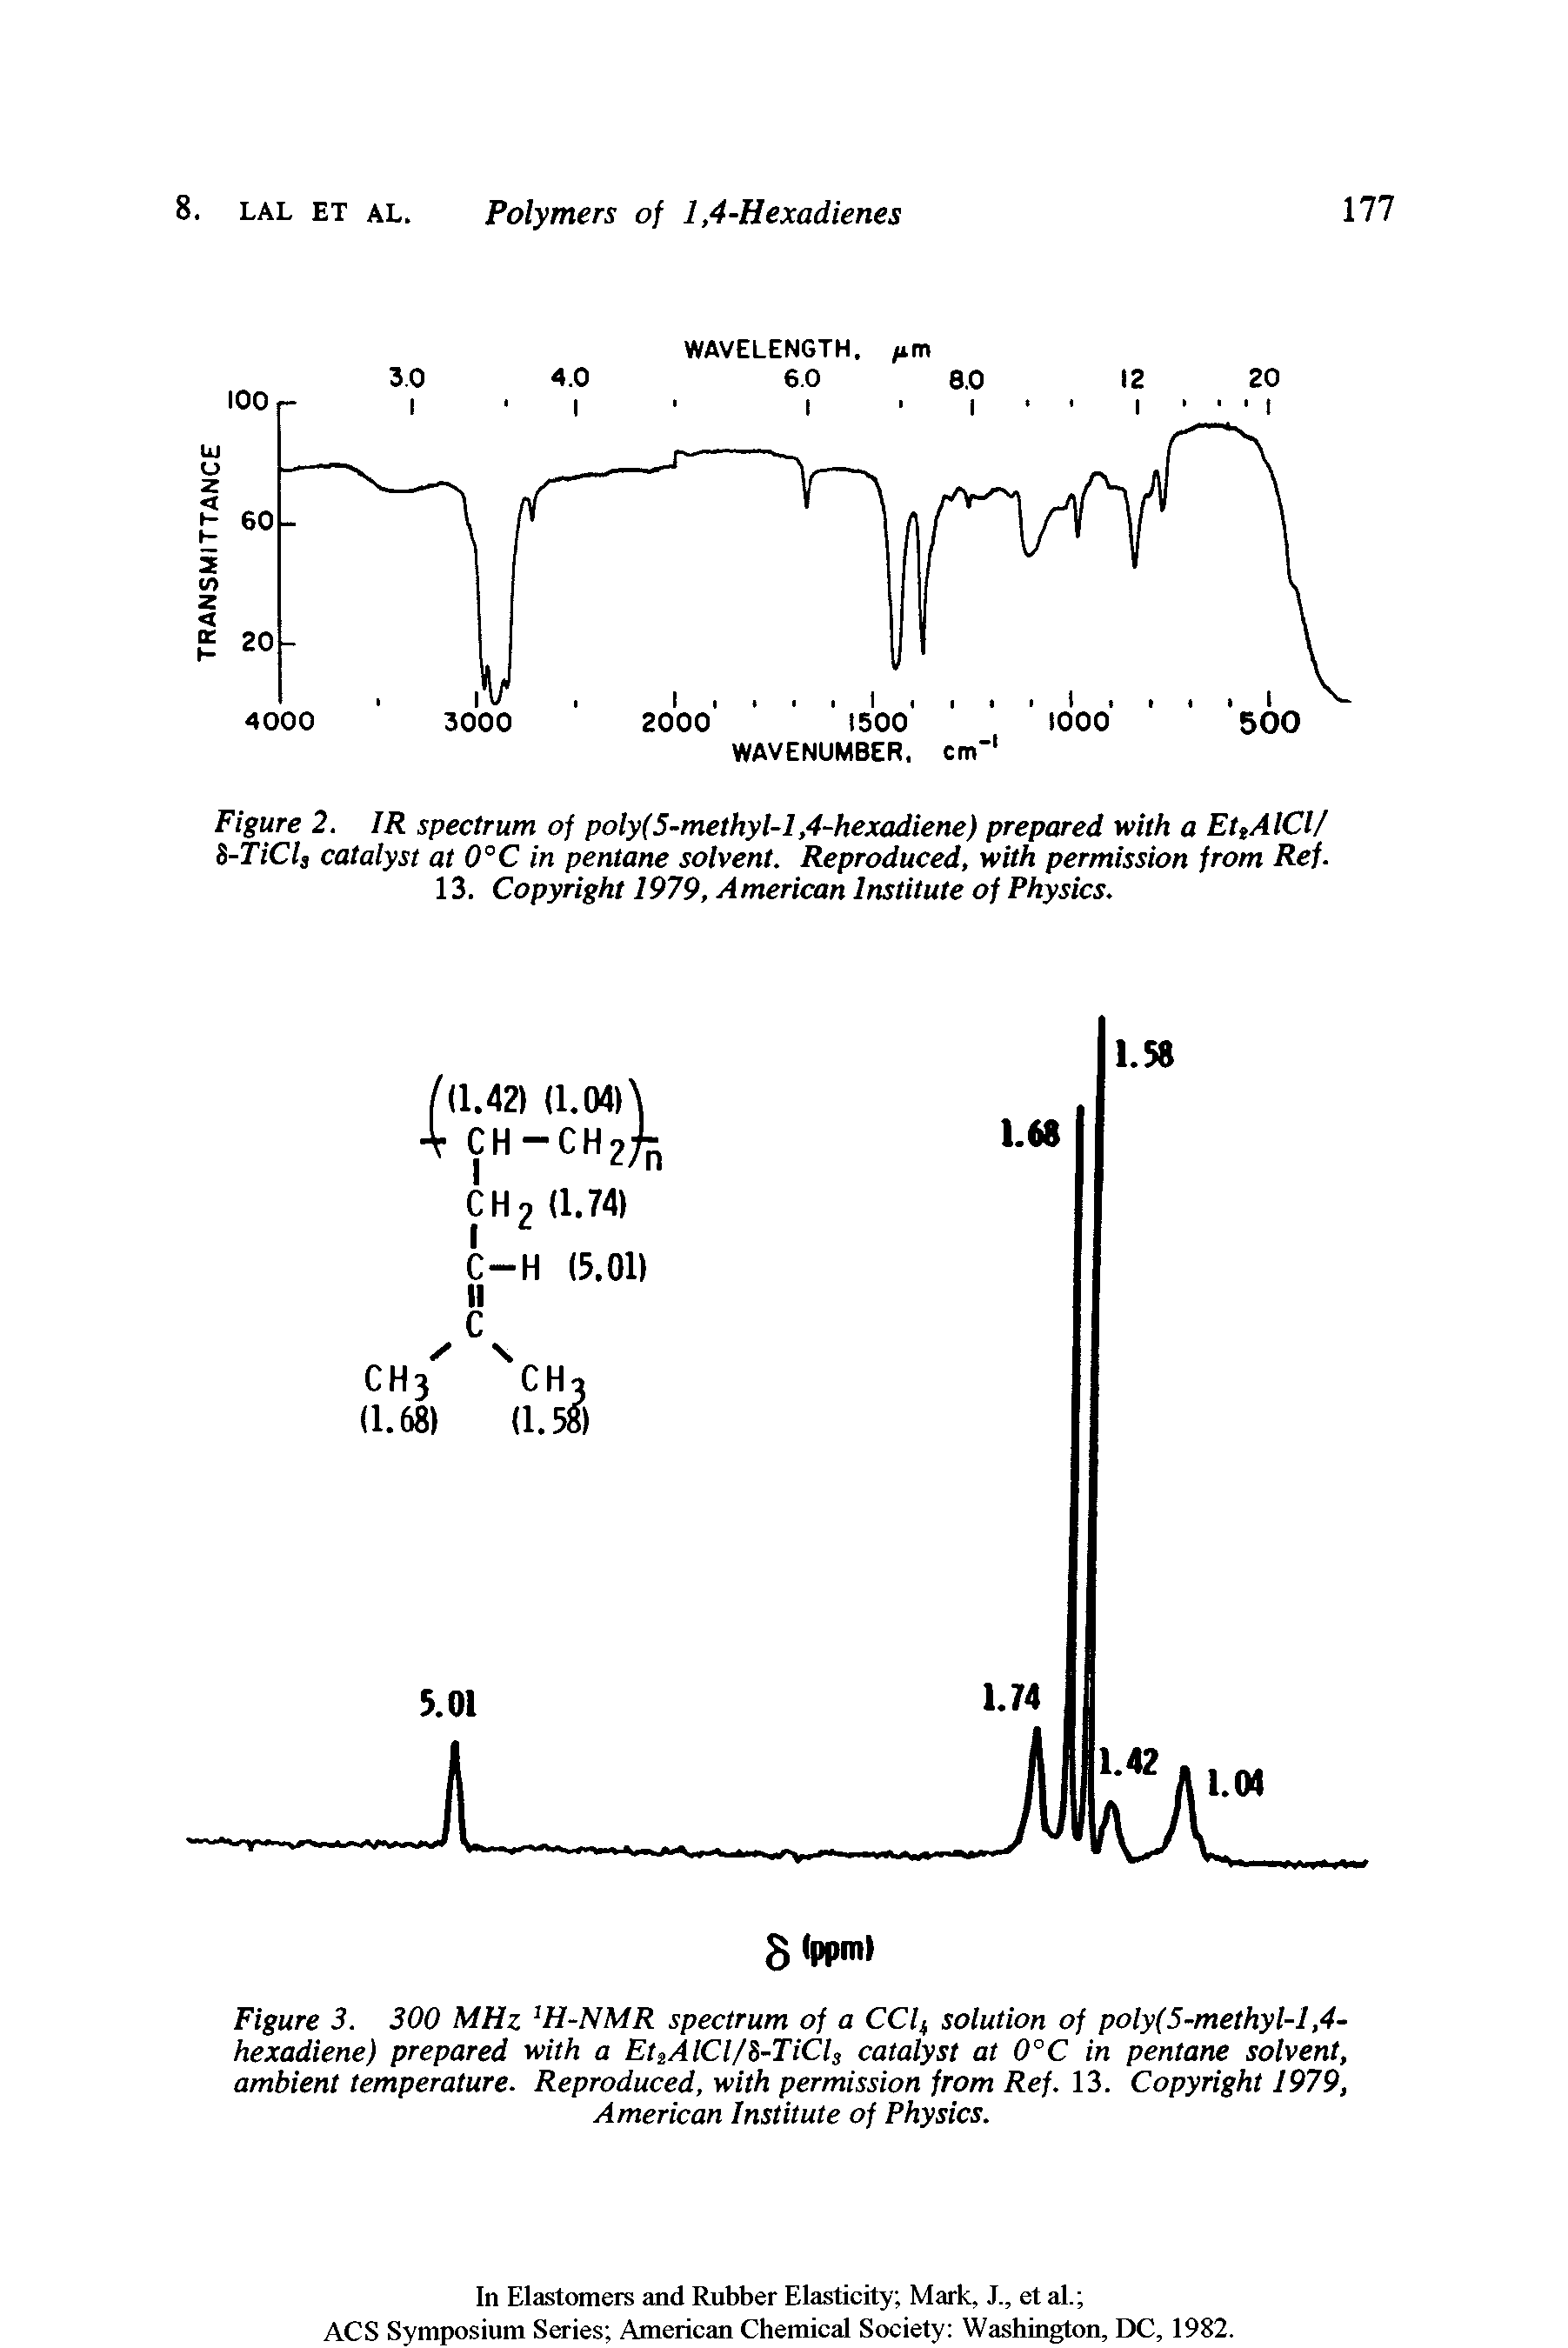 Figure 3. 300 MHz 1H-NMR spectrum of a CClt solution of poly(5-methyl-l,4-hexadiene) prepared with a Et2AlCl/S-TiCls catalyst at 0°C in pentane solvent, ambient temperature. Reproduced, with permission from Ref. 13. Copyright 1979, American Institute of Physics.